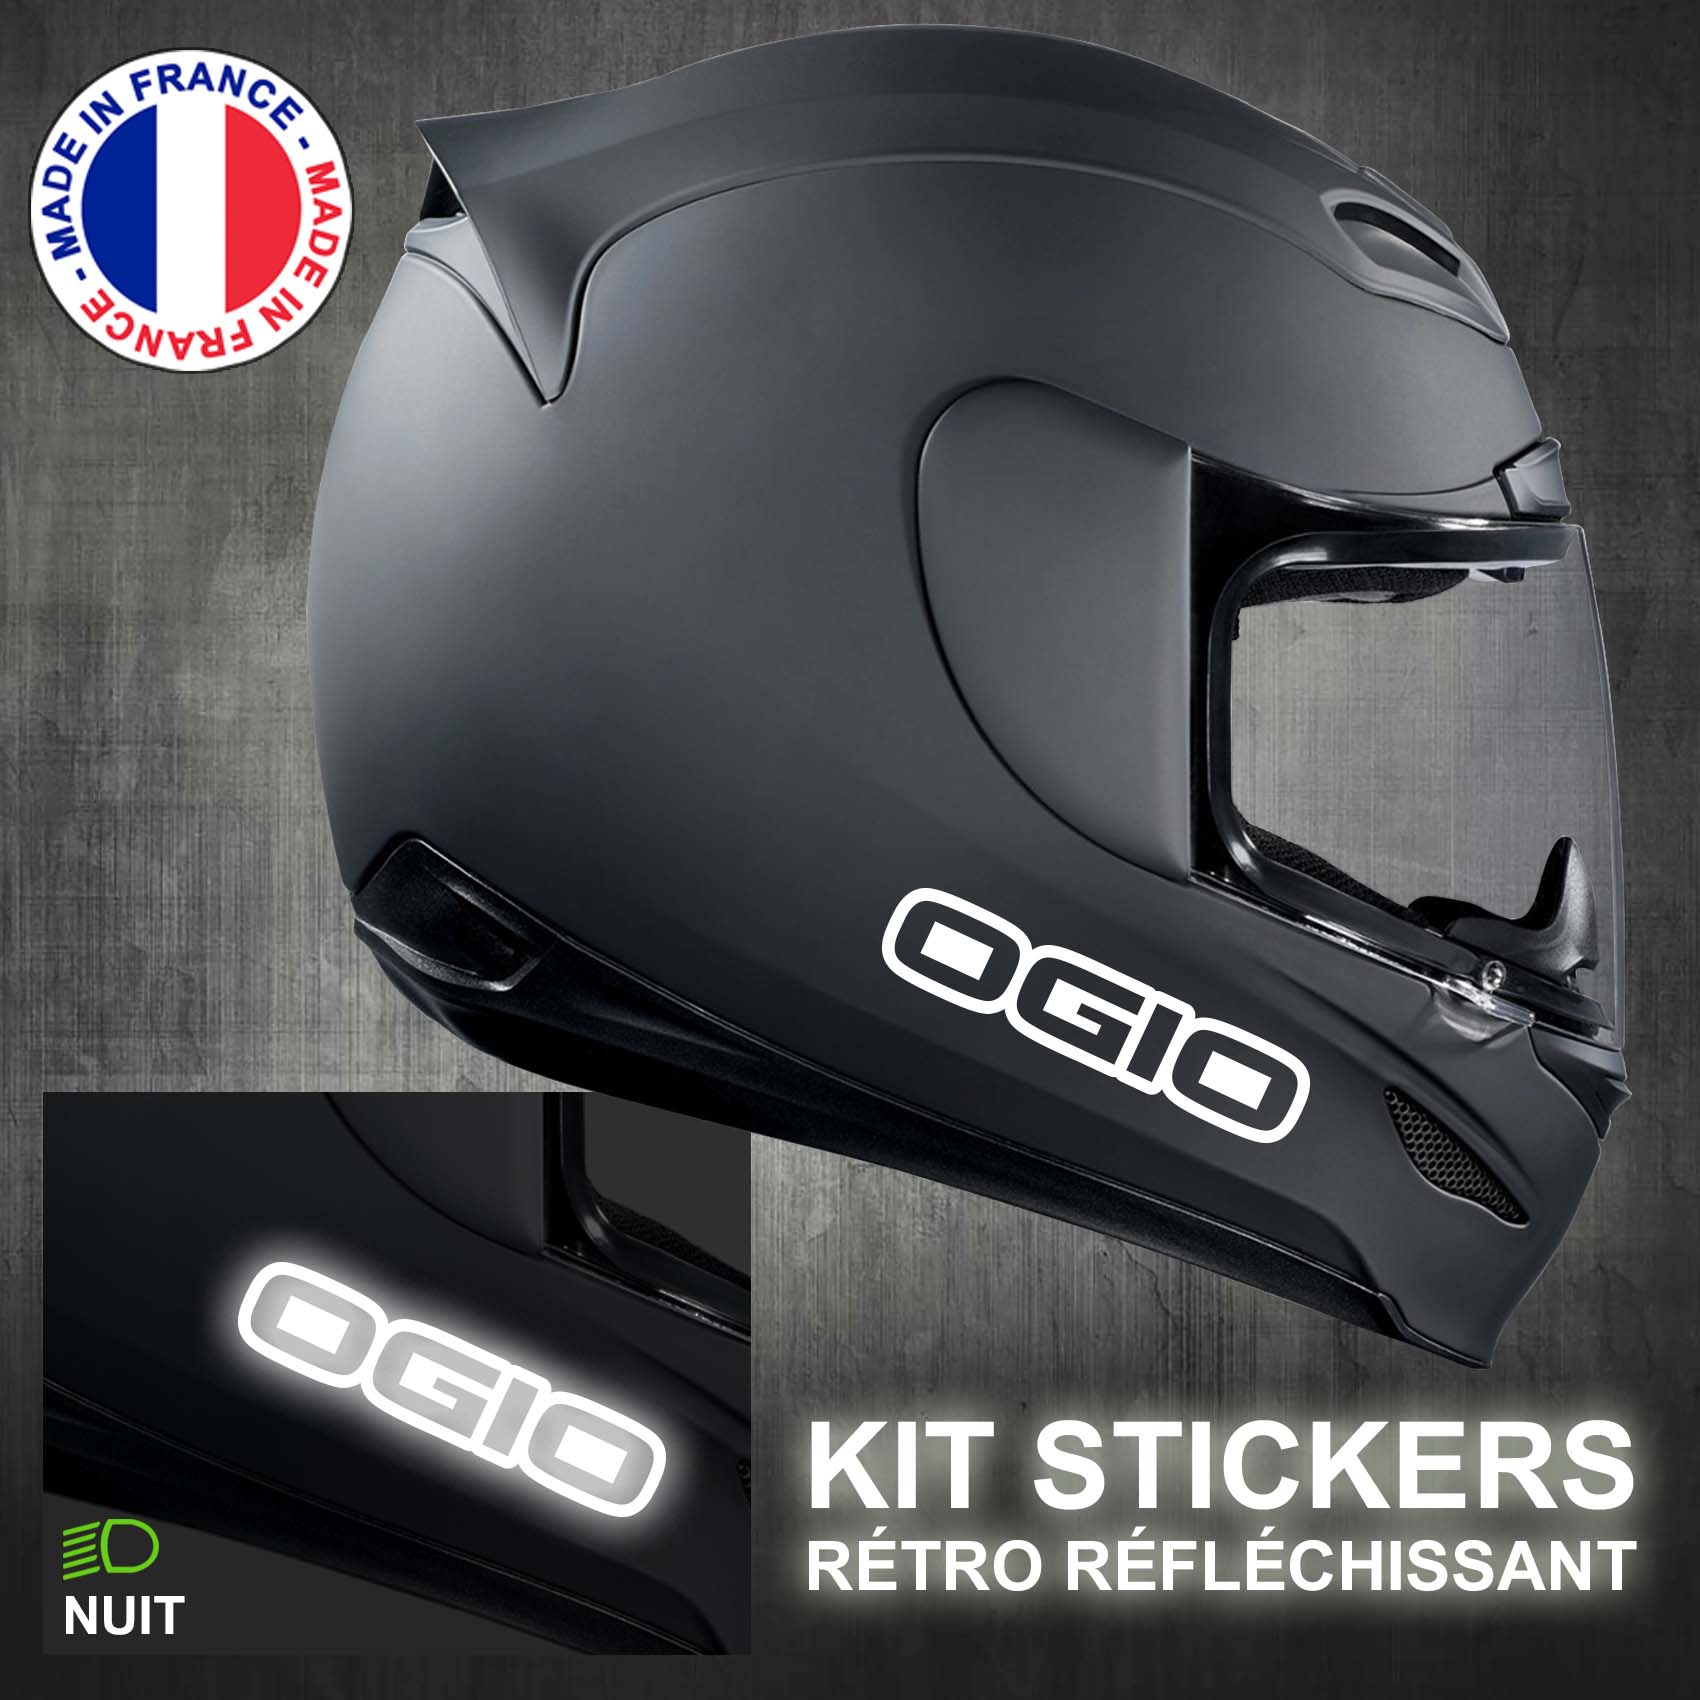 stickers-casque-moto-ogio-ref1-retro-reflechissant-autocollant-noir-moto-velo-tuning-racing-route-sticker-casques-adhesif-scooter-nuit-securite-decals-personnalise-personnalisable-min